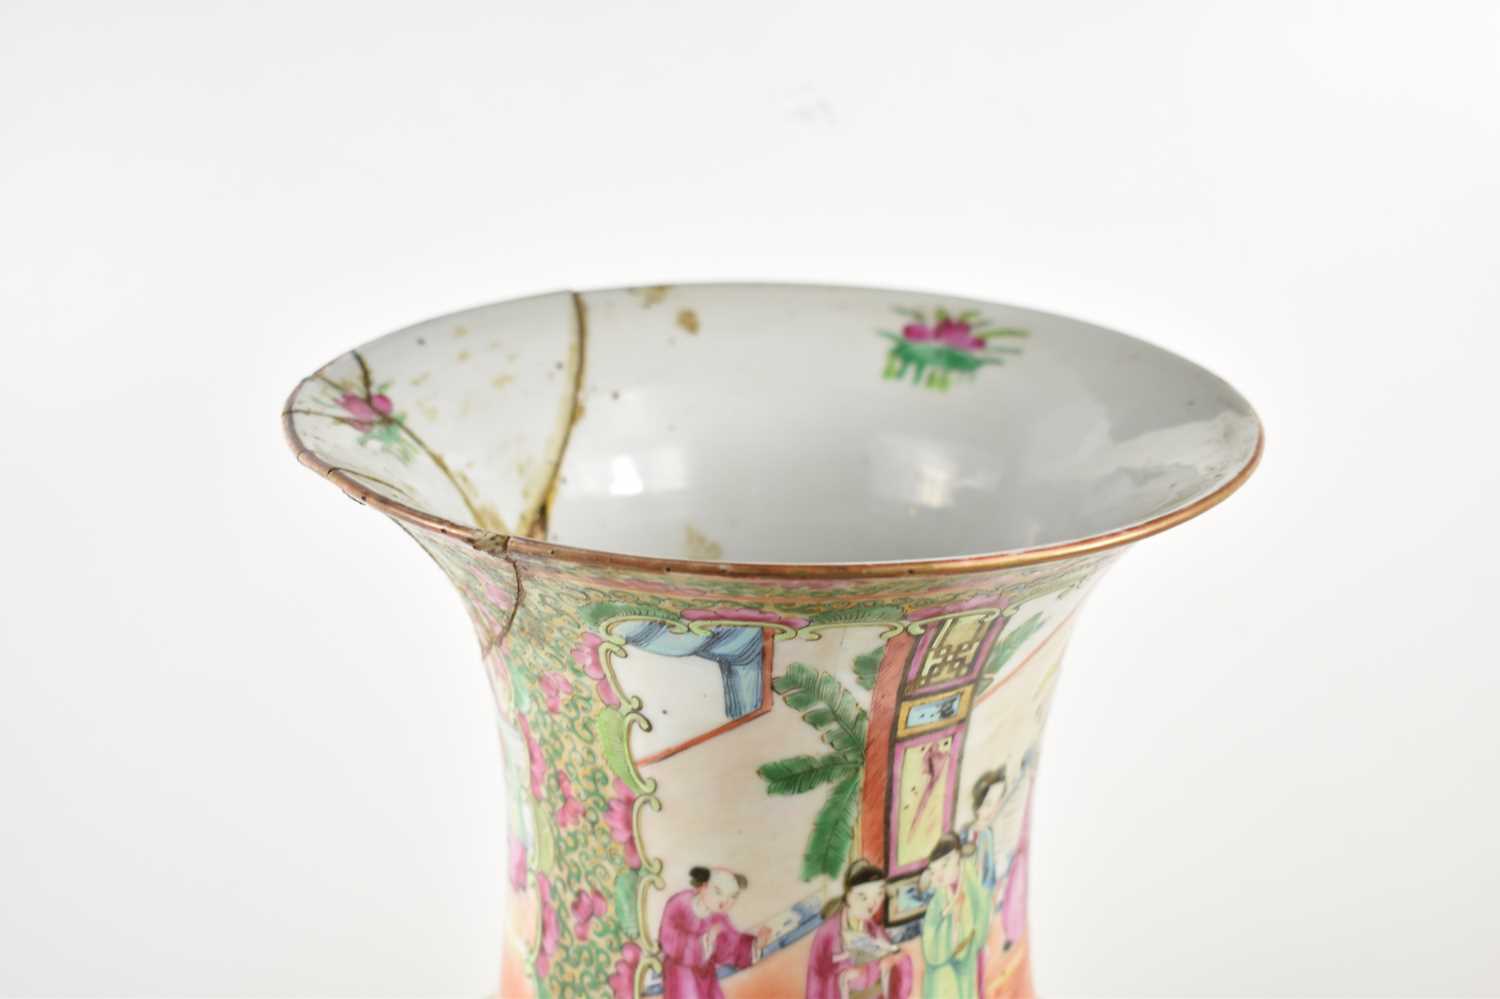 A 19th century Chinese Famille Rose vase, decorated with figural scenes, insects and flowers, - Image 3 of 3